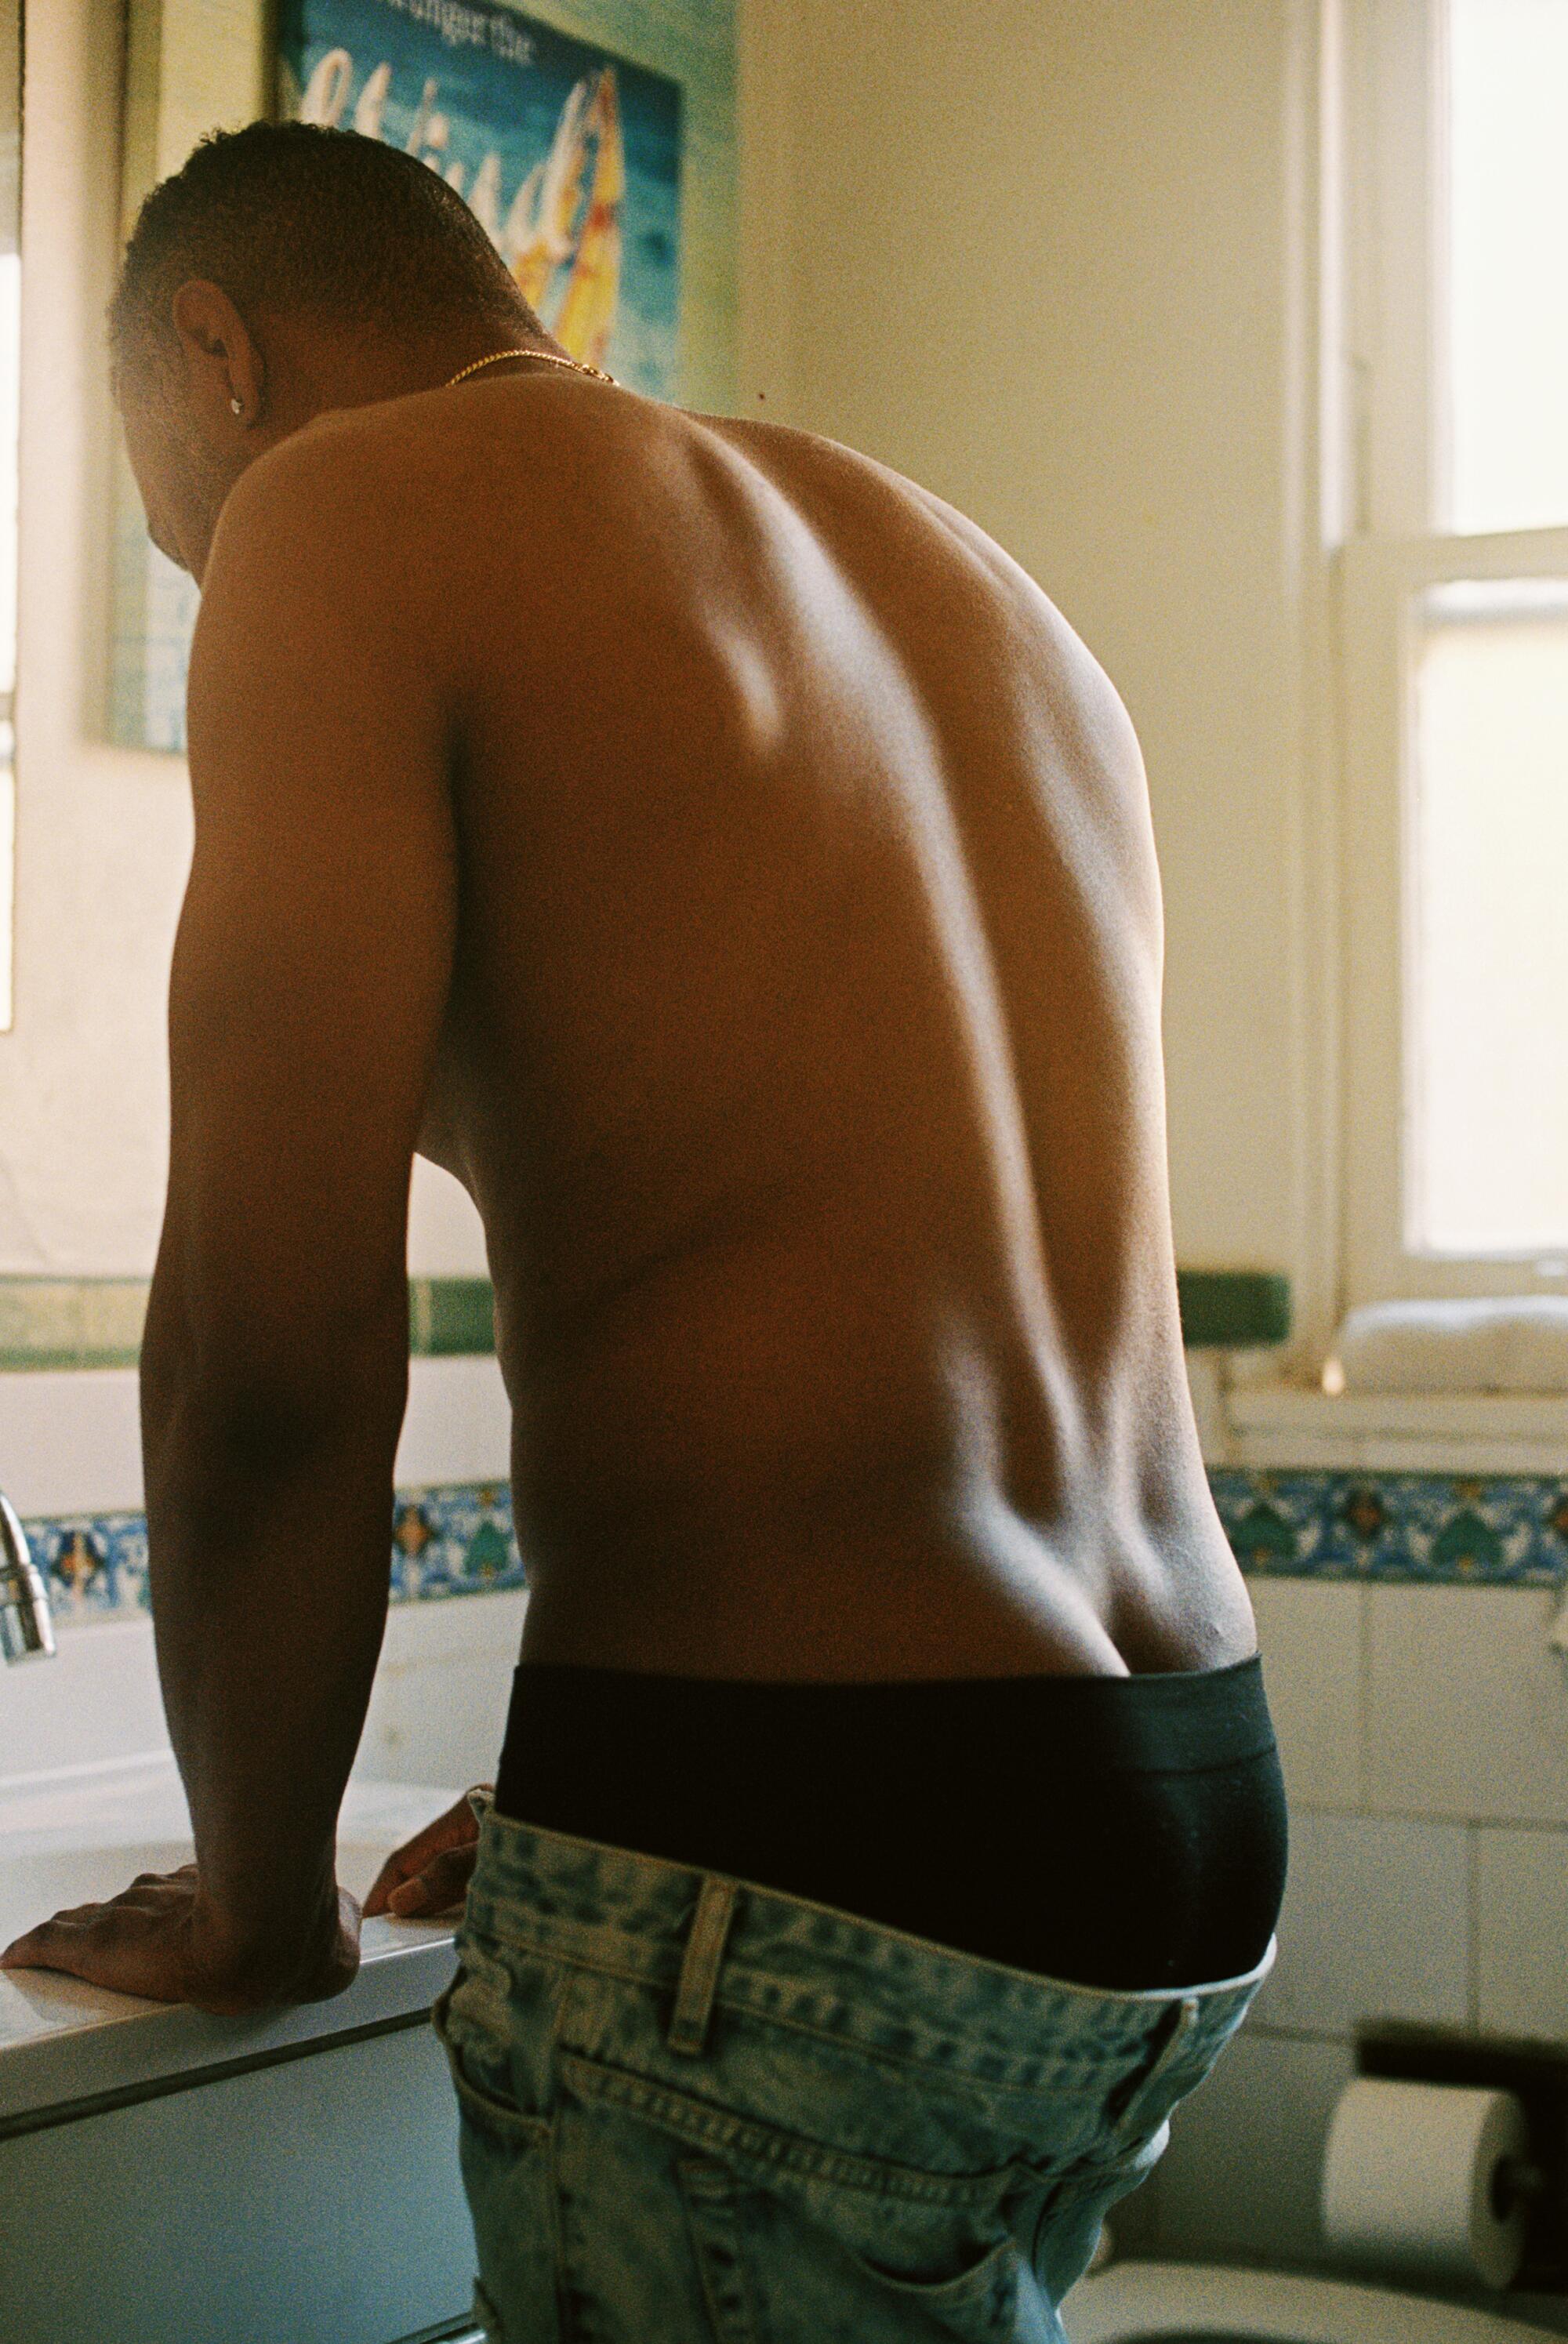 A shirtless man leans over a sink in a bathroom, his underwear showing above his jeans.